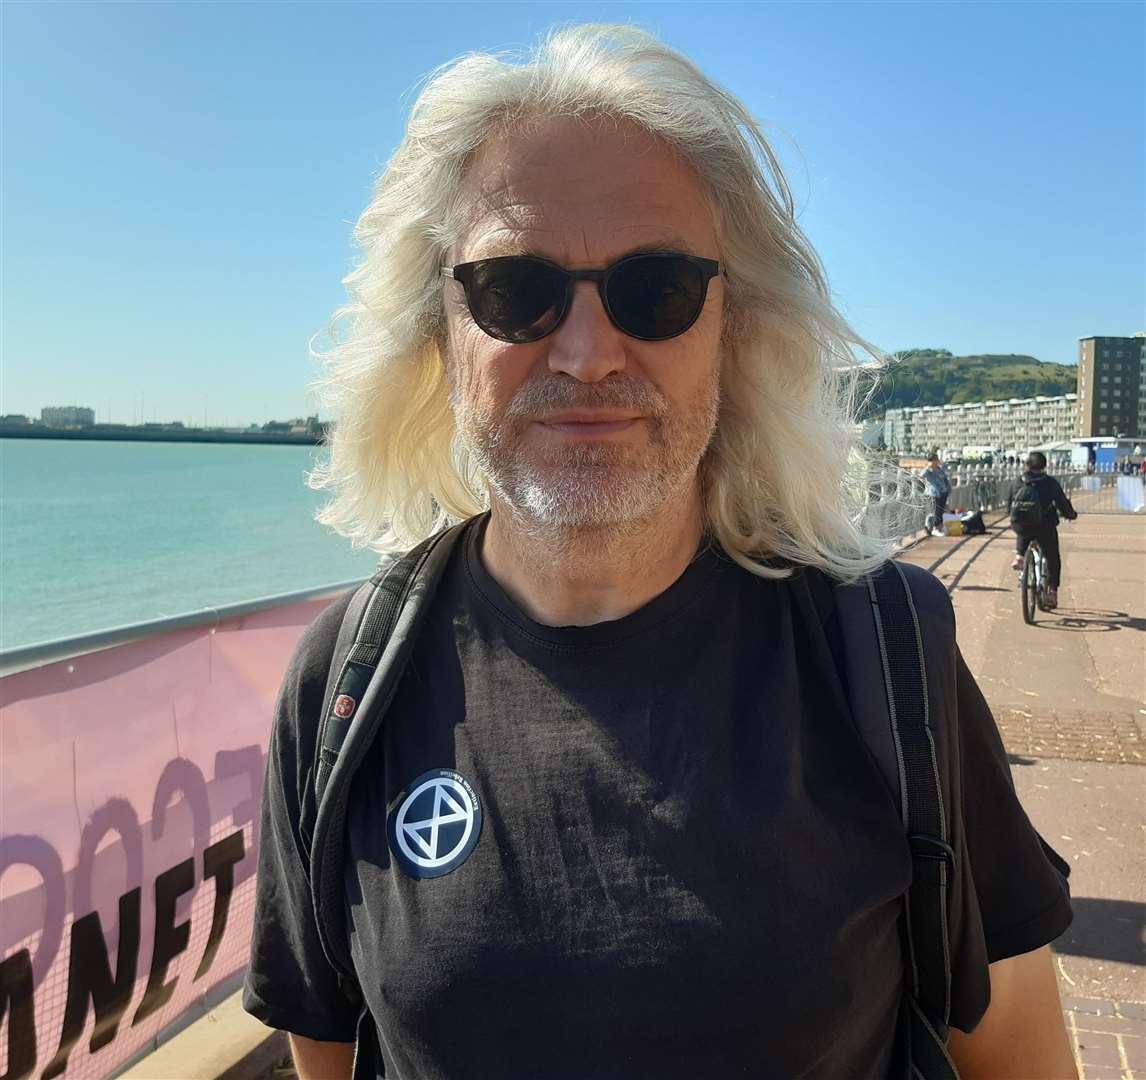 Extinction Rebellion member Peter Batt believes any proposed benefits will not outweigh the environmental impact the scheme will have